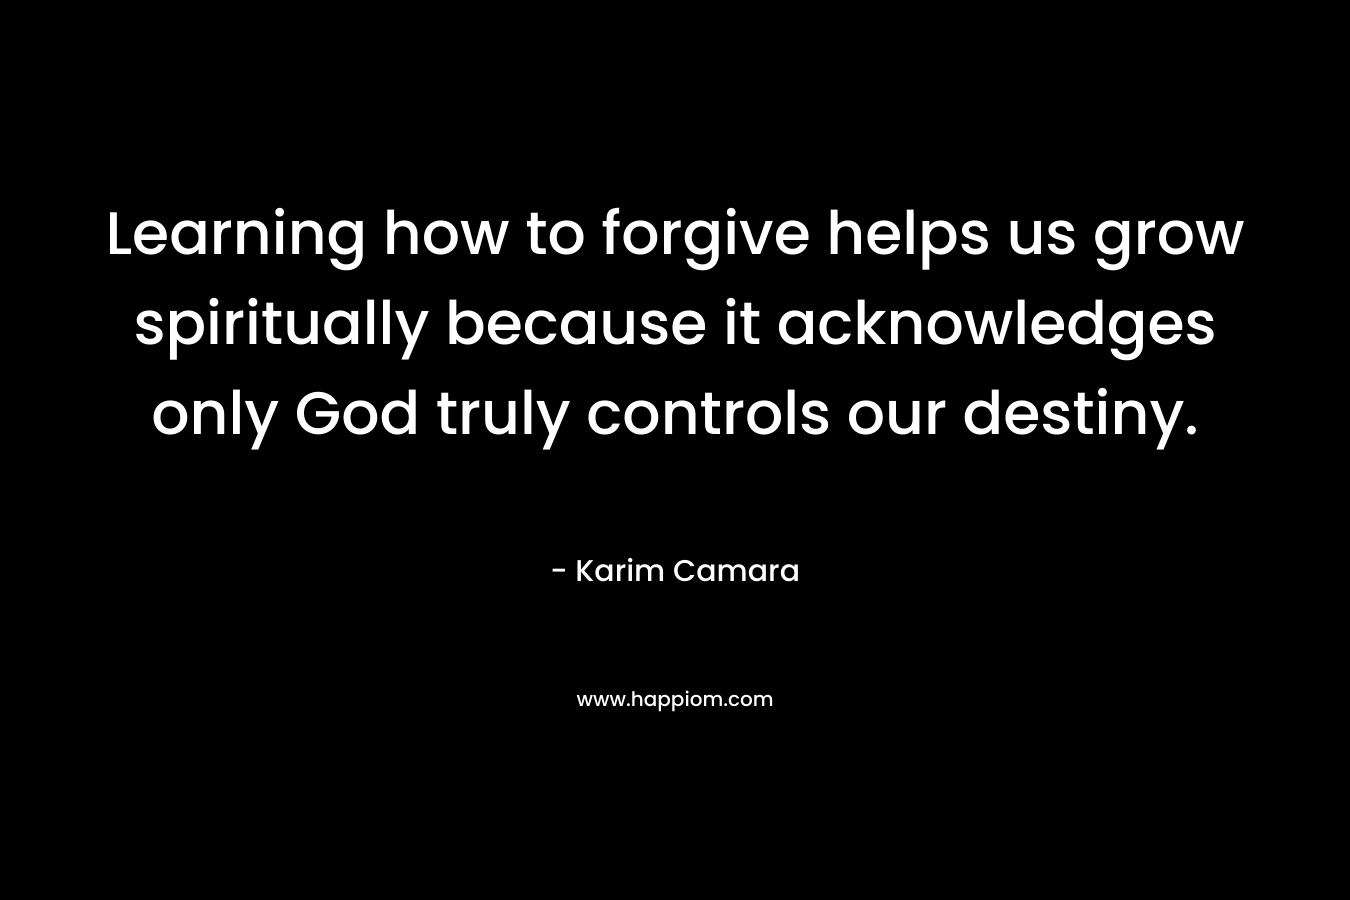 Learning how to forgive helps us grow spiritually because it acknowledges only God truly controls our destiny.